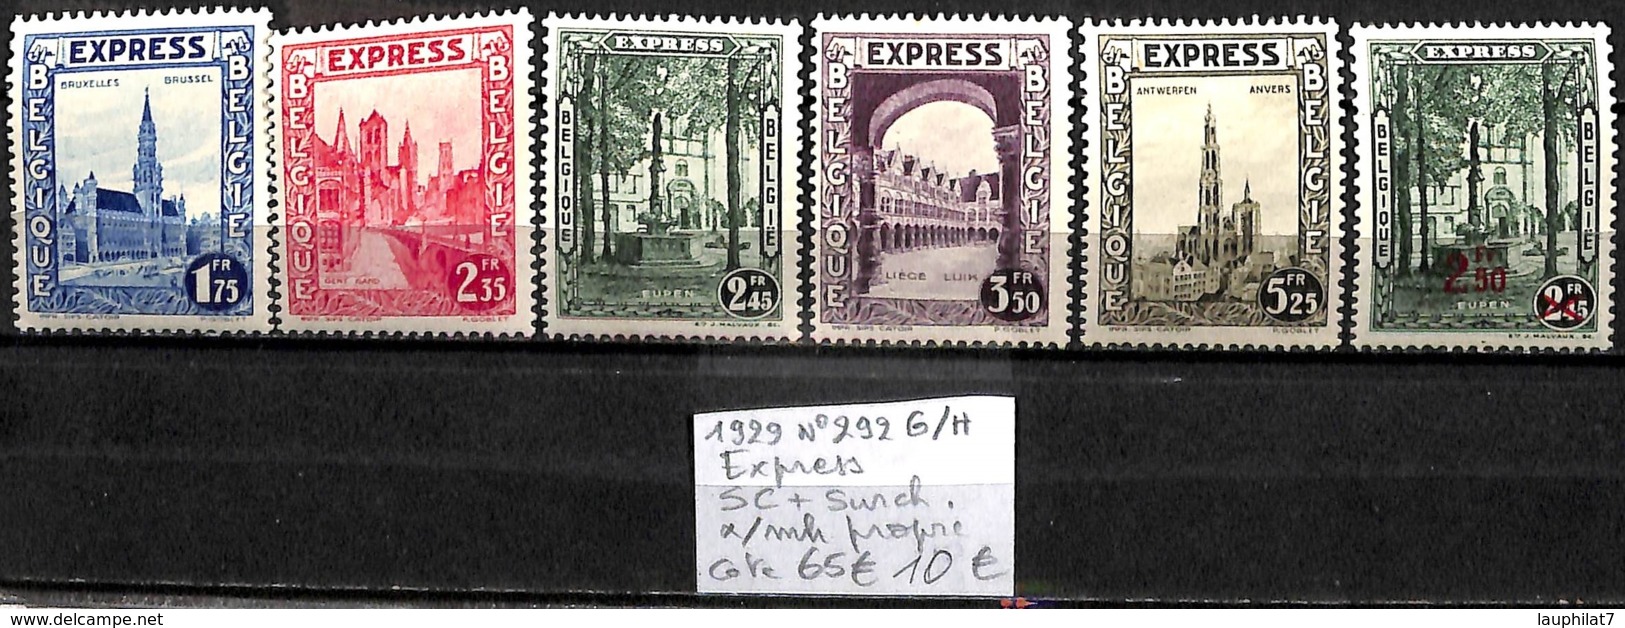 [846998]TB//*/Mh-c:65e-Belgique 1929 - N° 292G/H, Express, SC + Surcharge */mh Propre - Unused Stamps